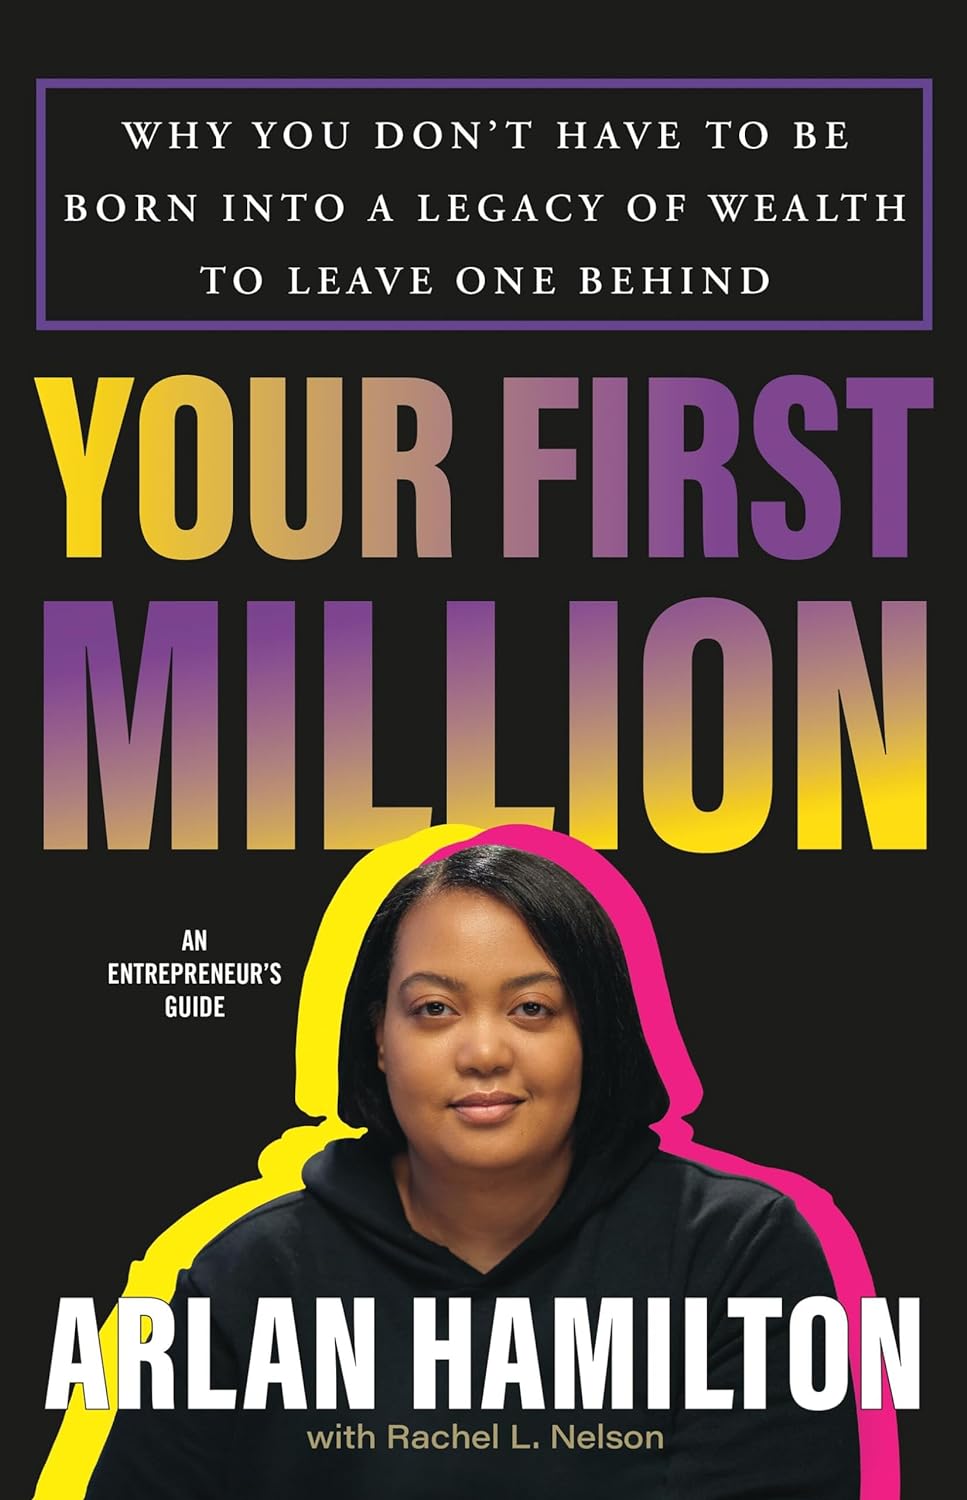 Your First Million // Why You Don't Have to Be Born Into a Legacy of Wealth to Leave One Behind